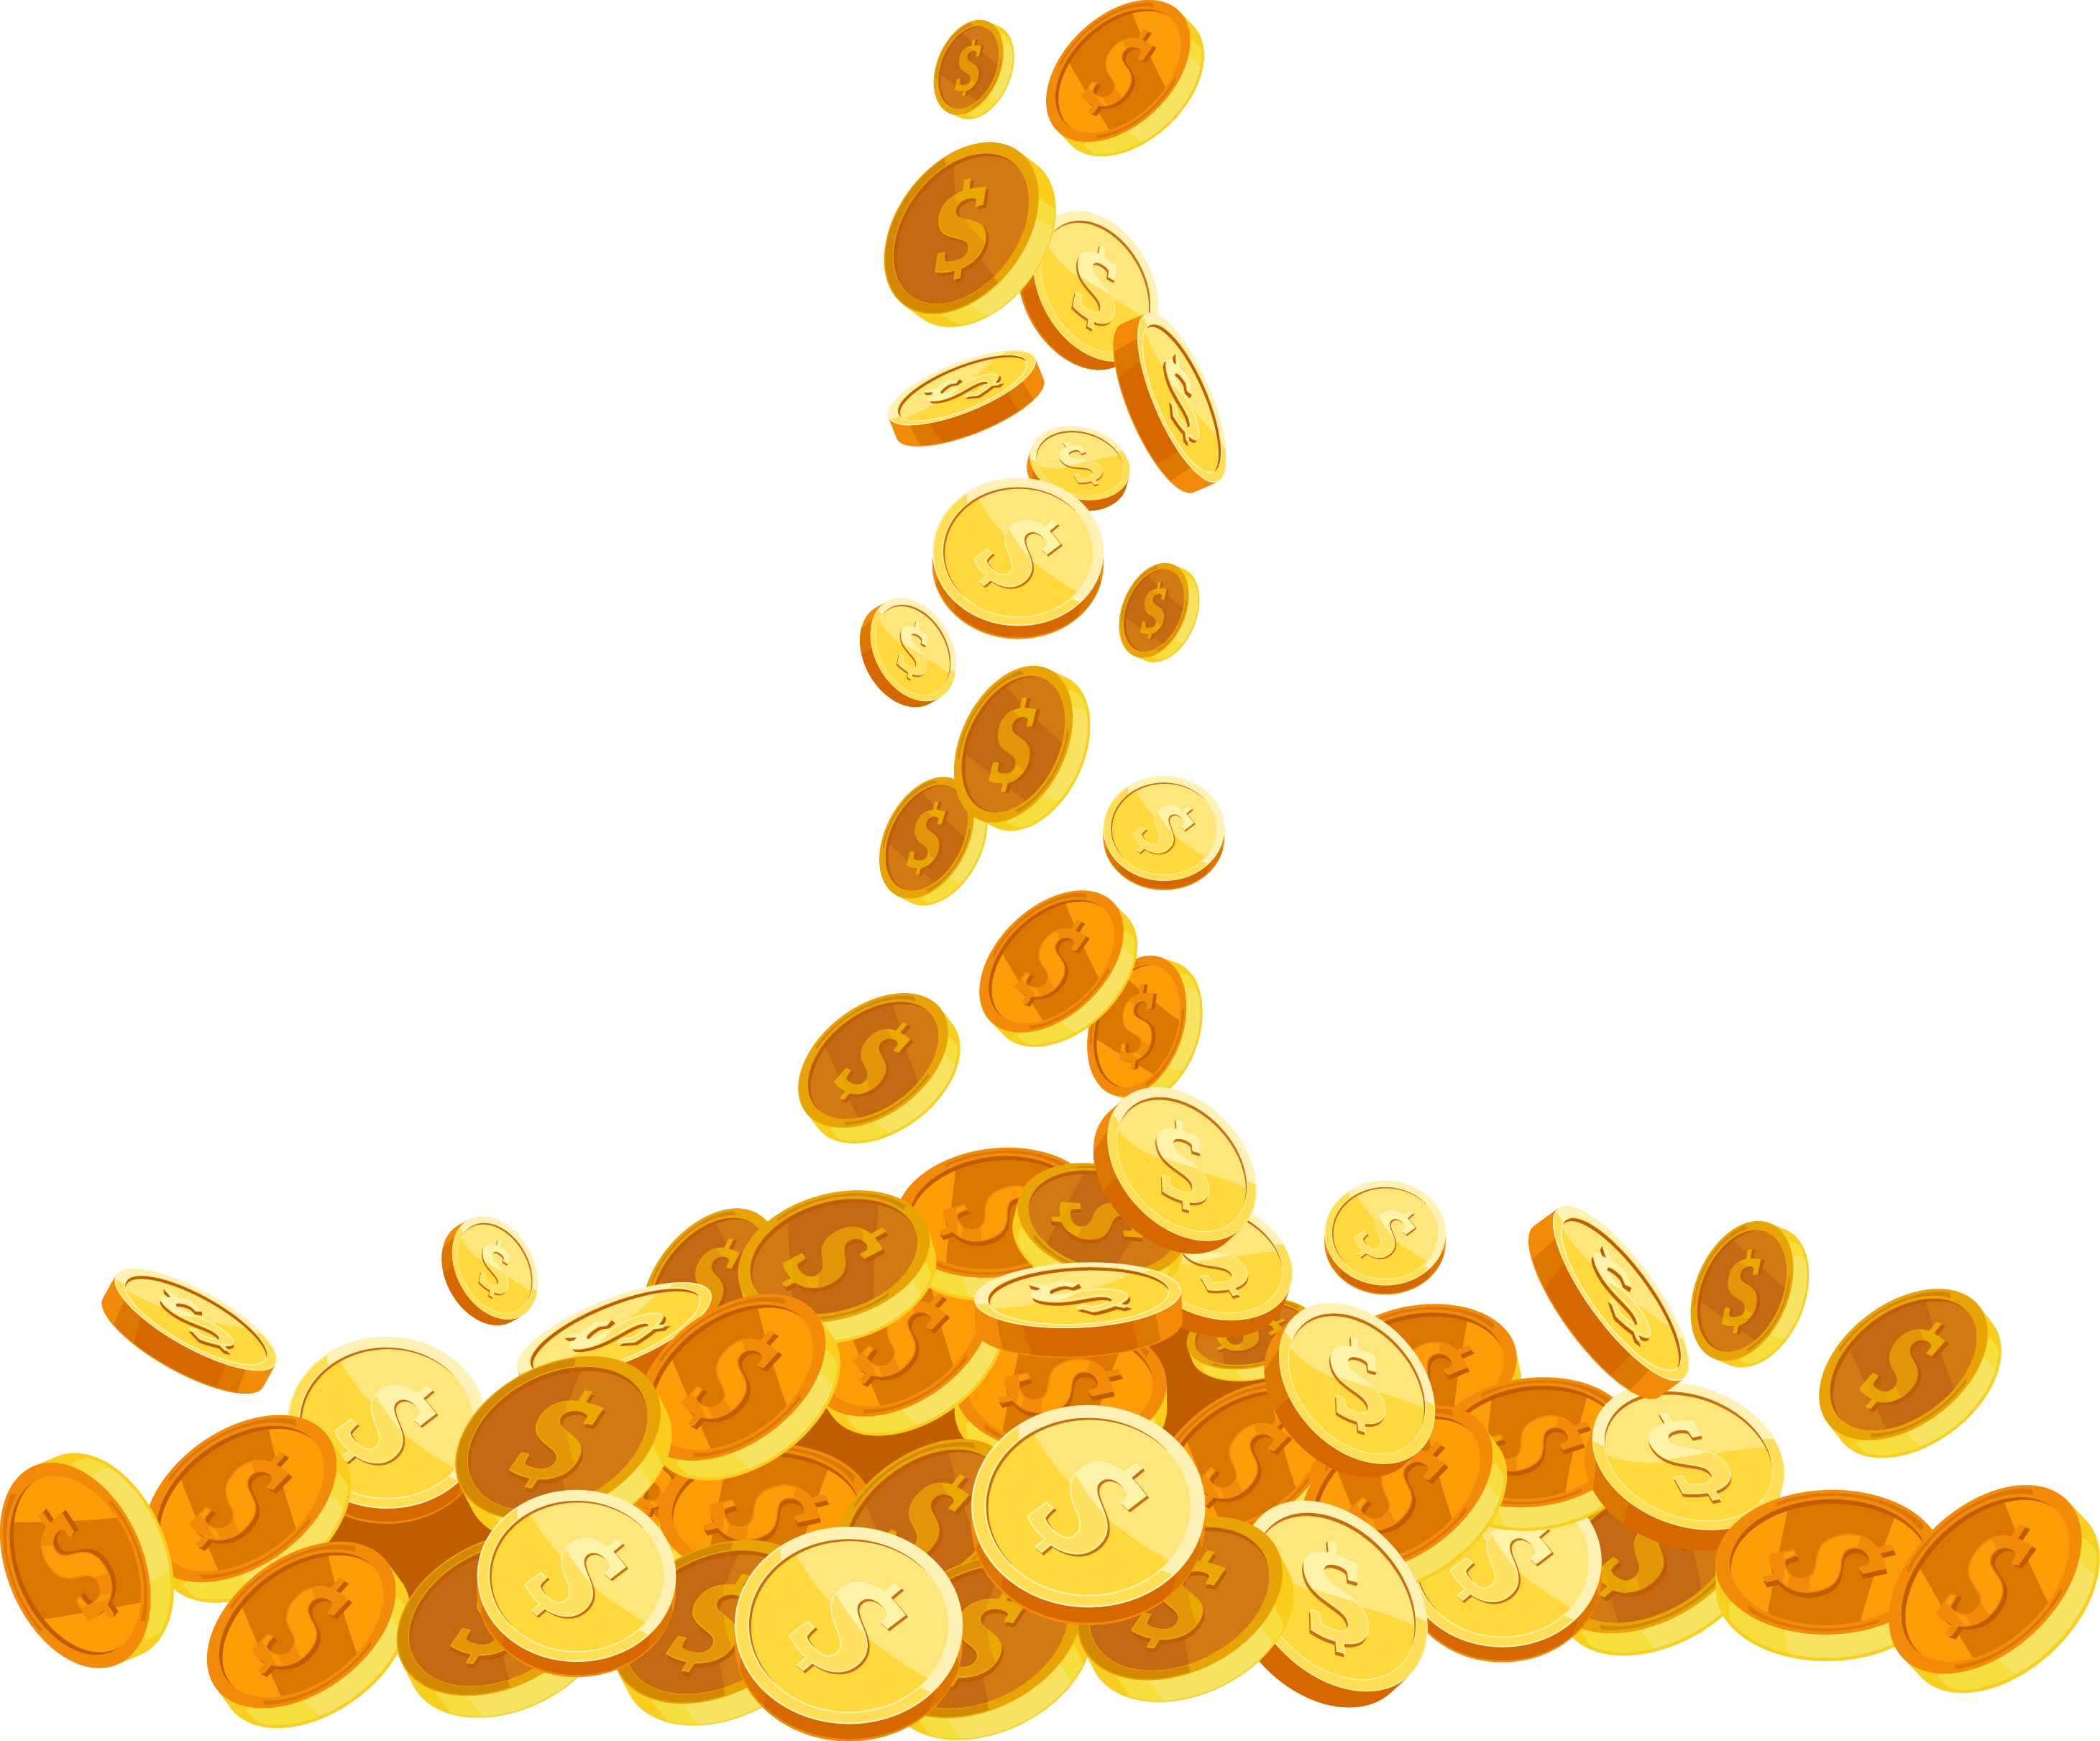 Coins Gold Painted Of Drop Hand Euclidean PNG Image